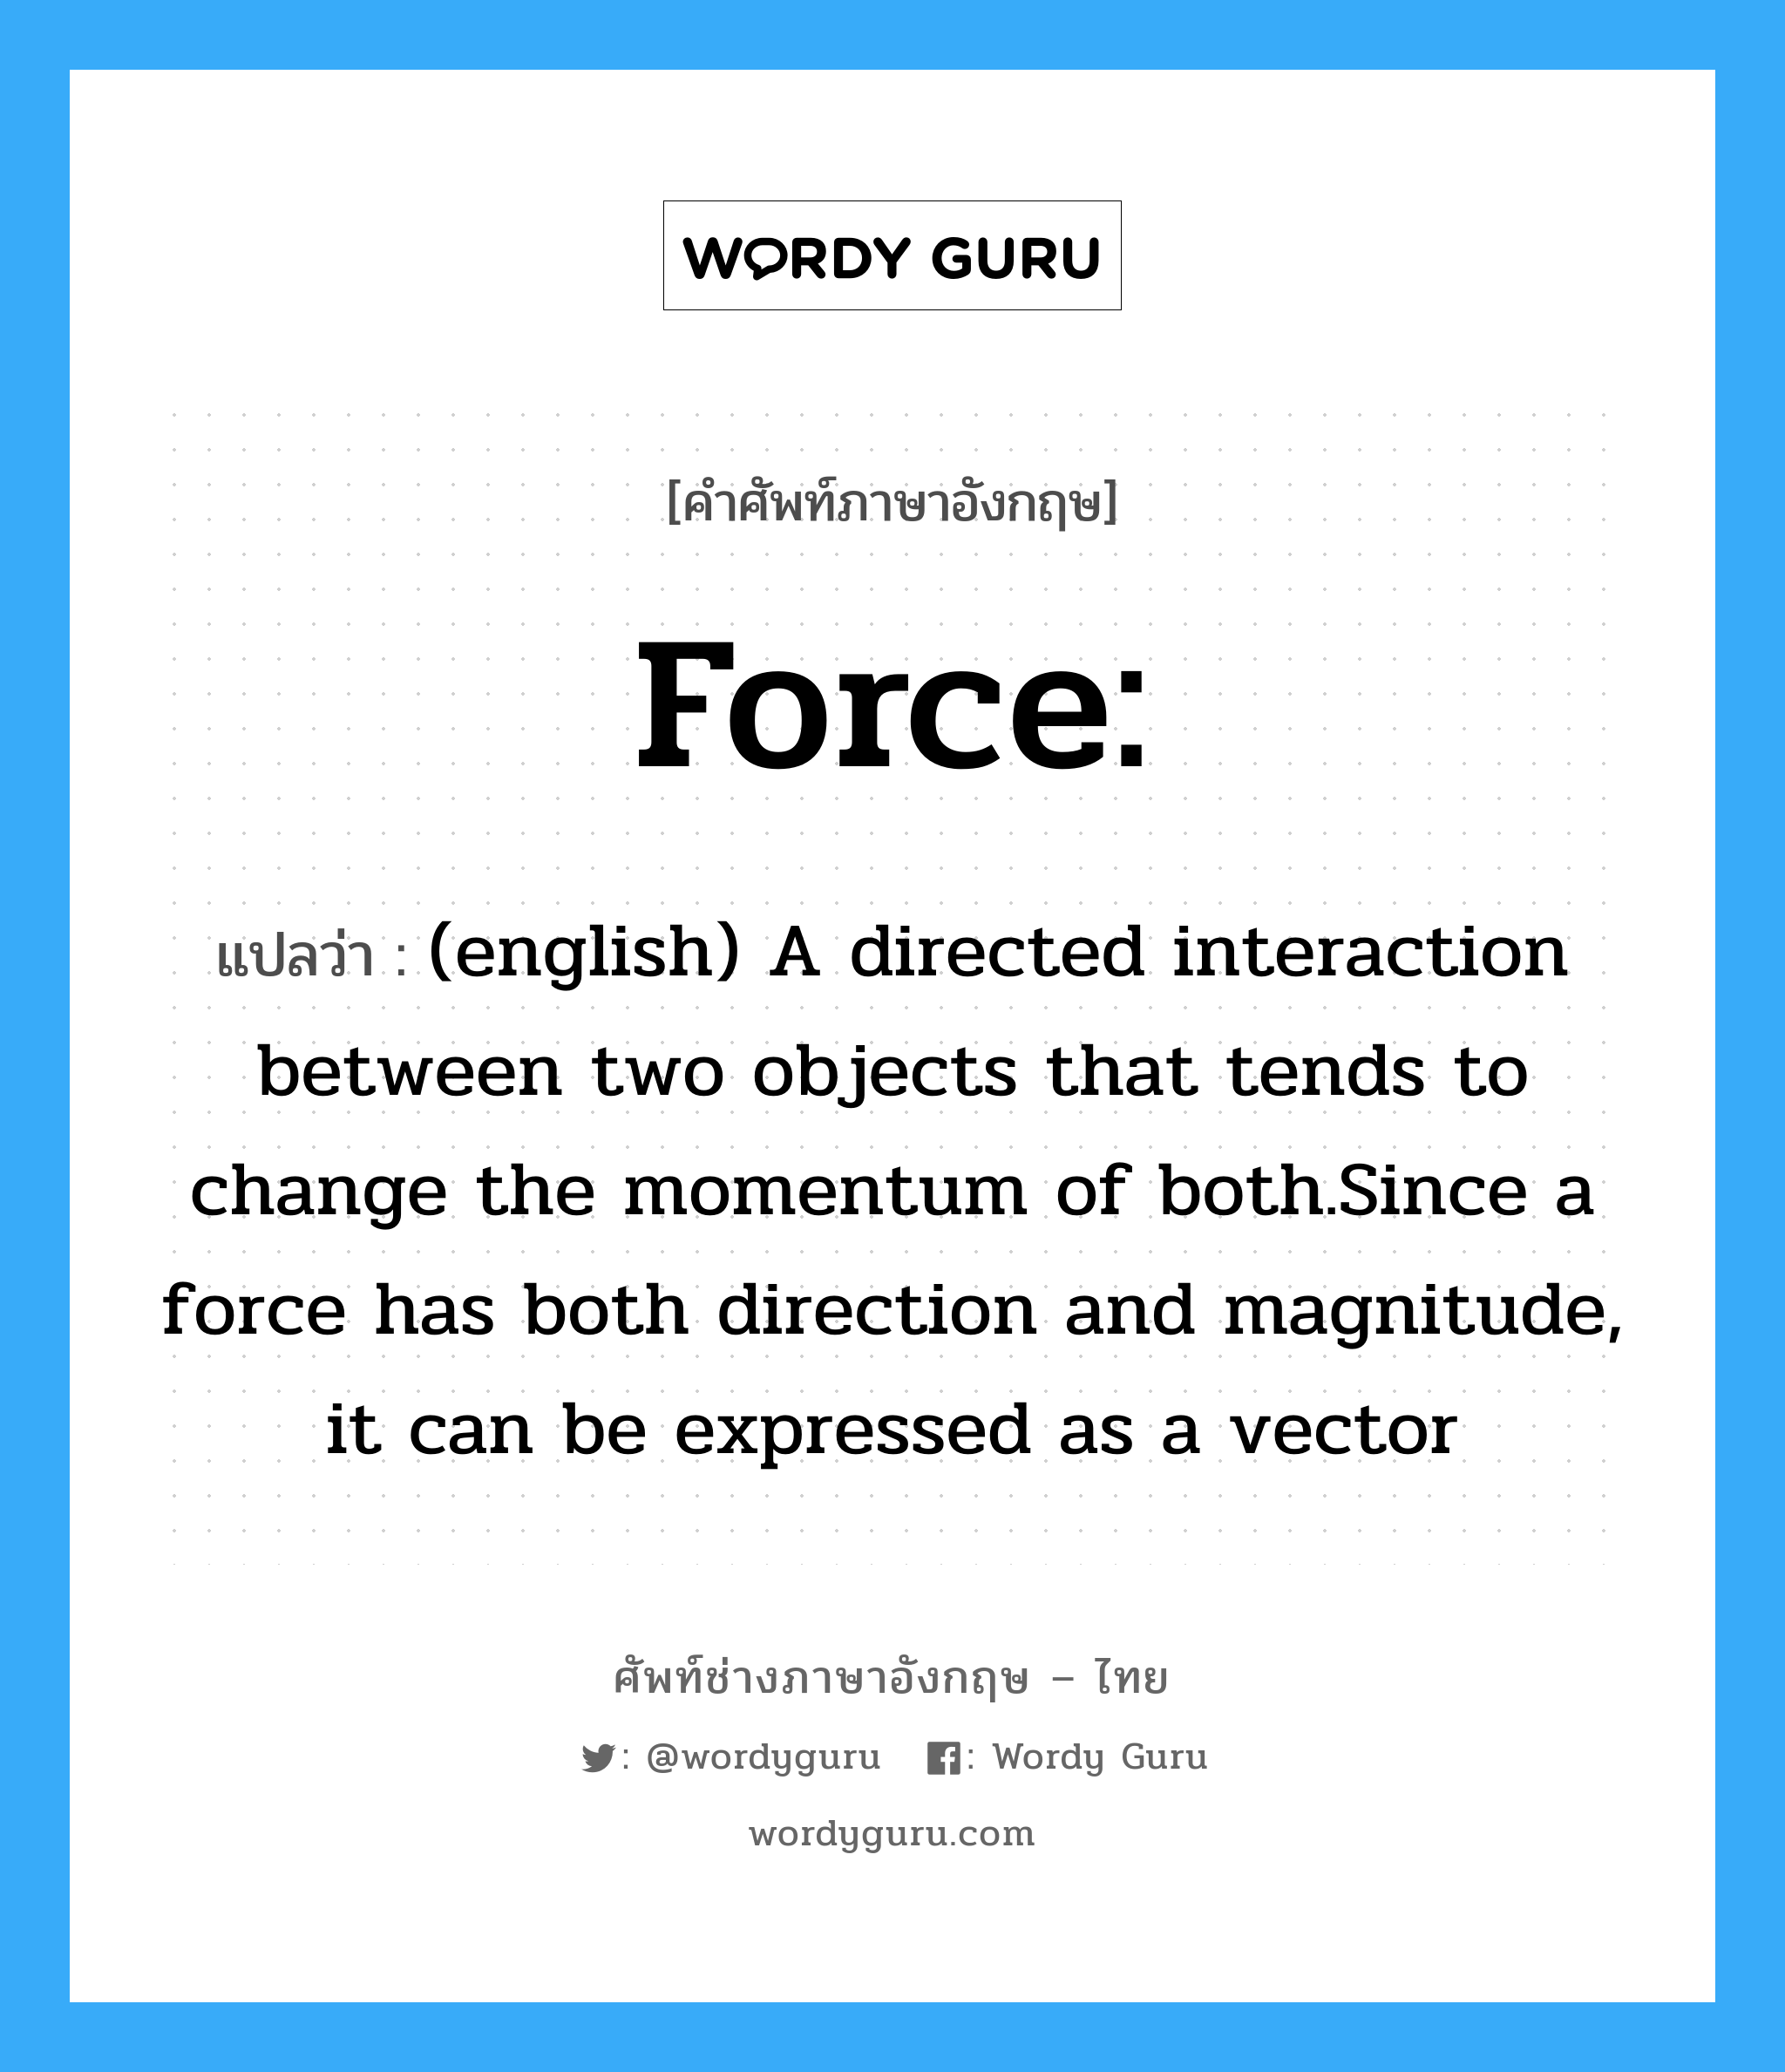 Force: แปลว่า?, คำศัพท์ช่างภาษาอังกฤษ - ไทย Force: คำศัพท์ภาษาอังกฤษ Force: แปลว่า (english) A directed interaction between two objects that tends to change the momentum of both.Since a force has both direction and magnitude, it can be expressed as a vector